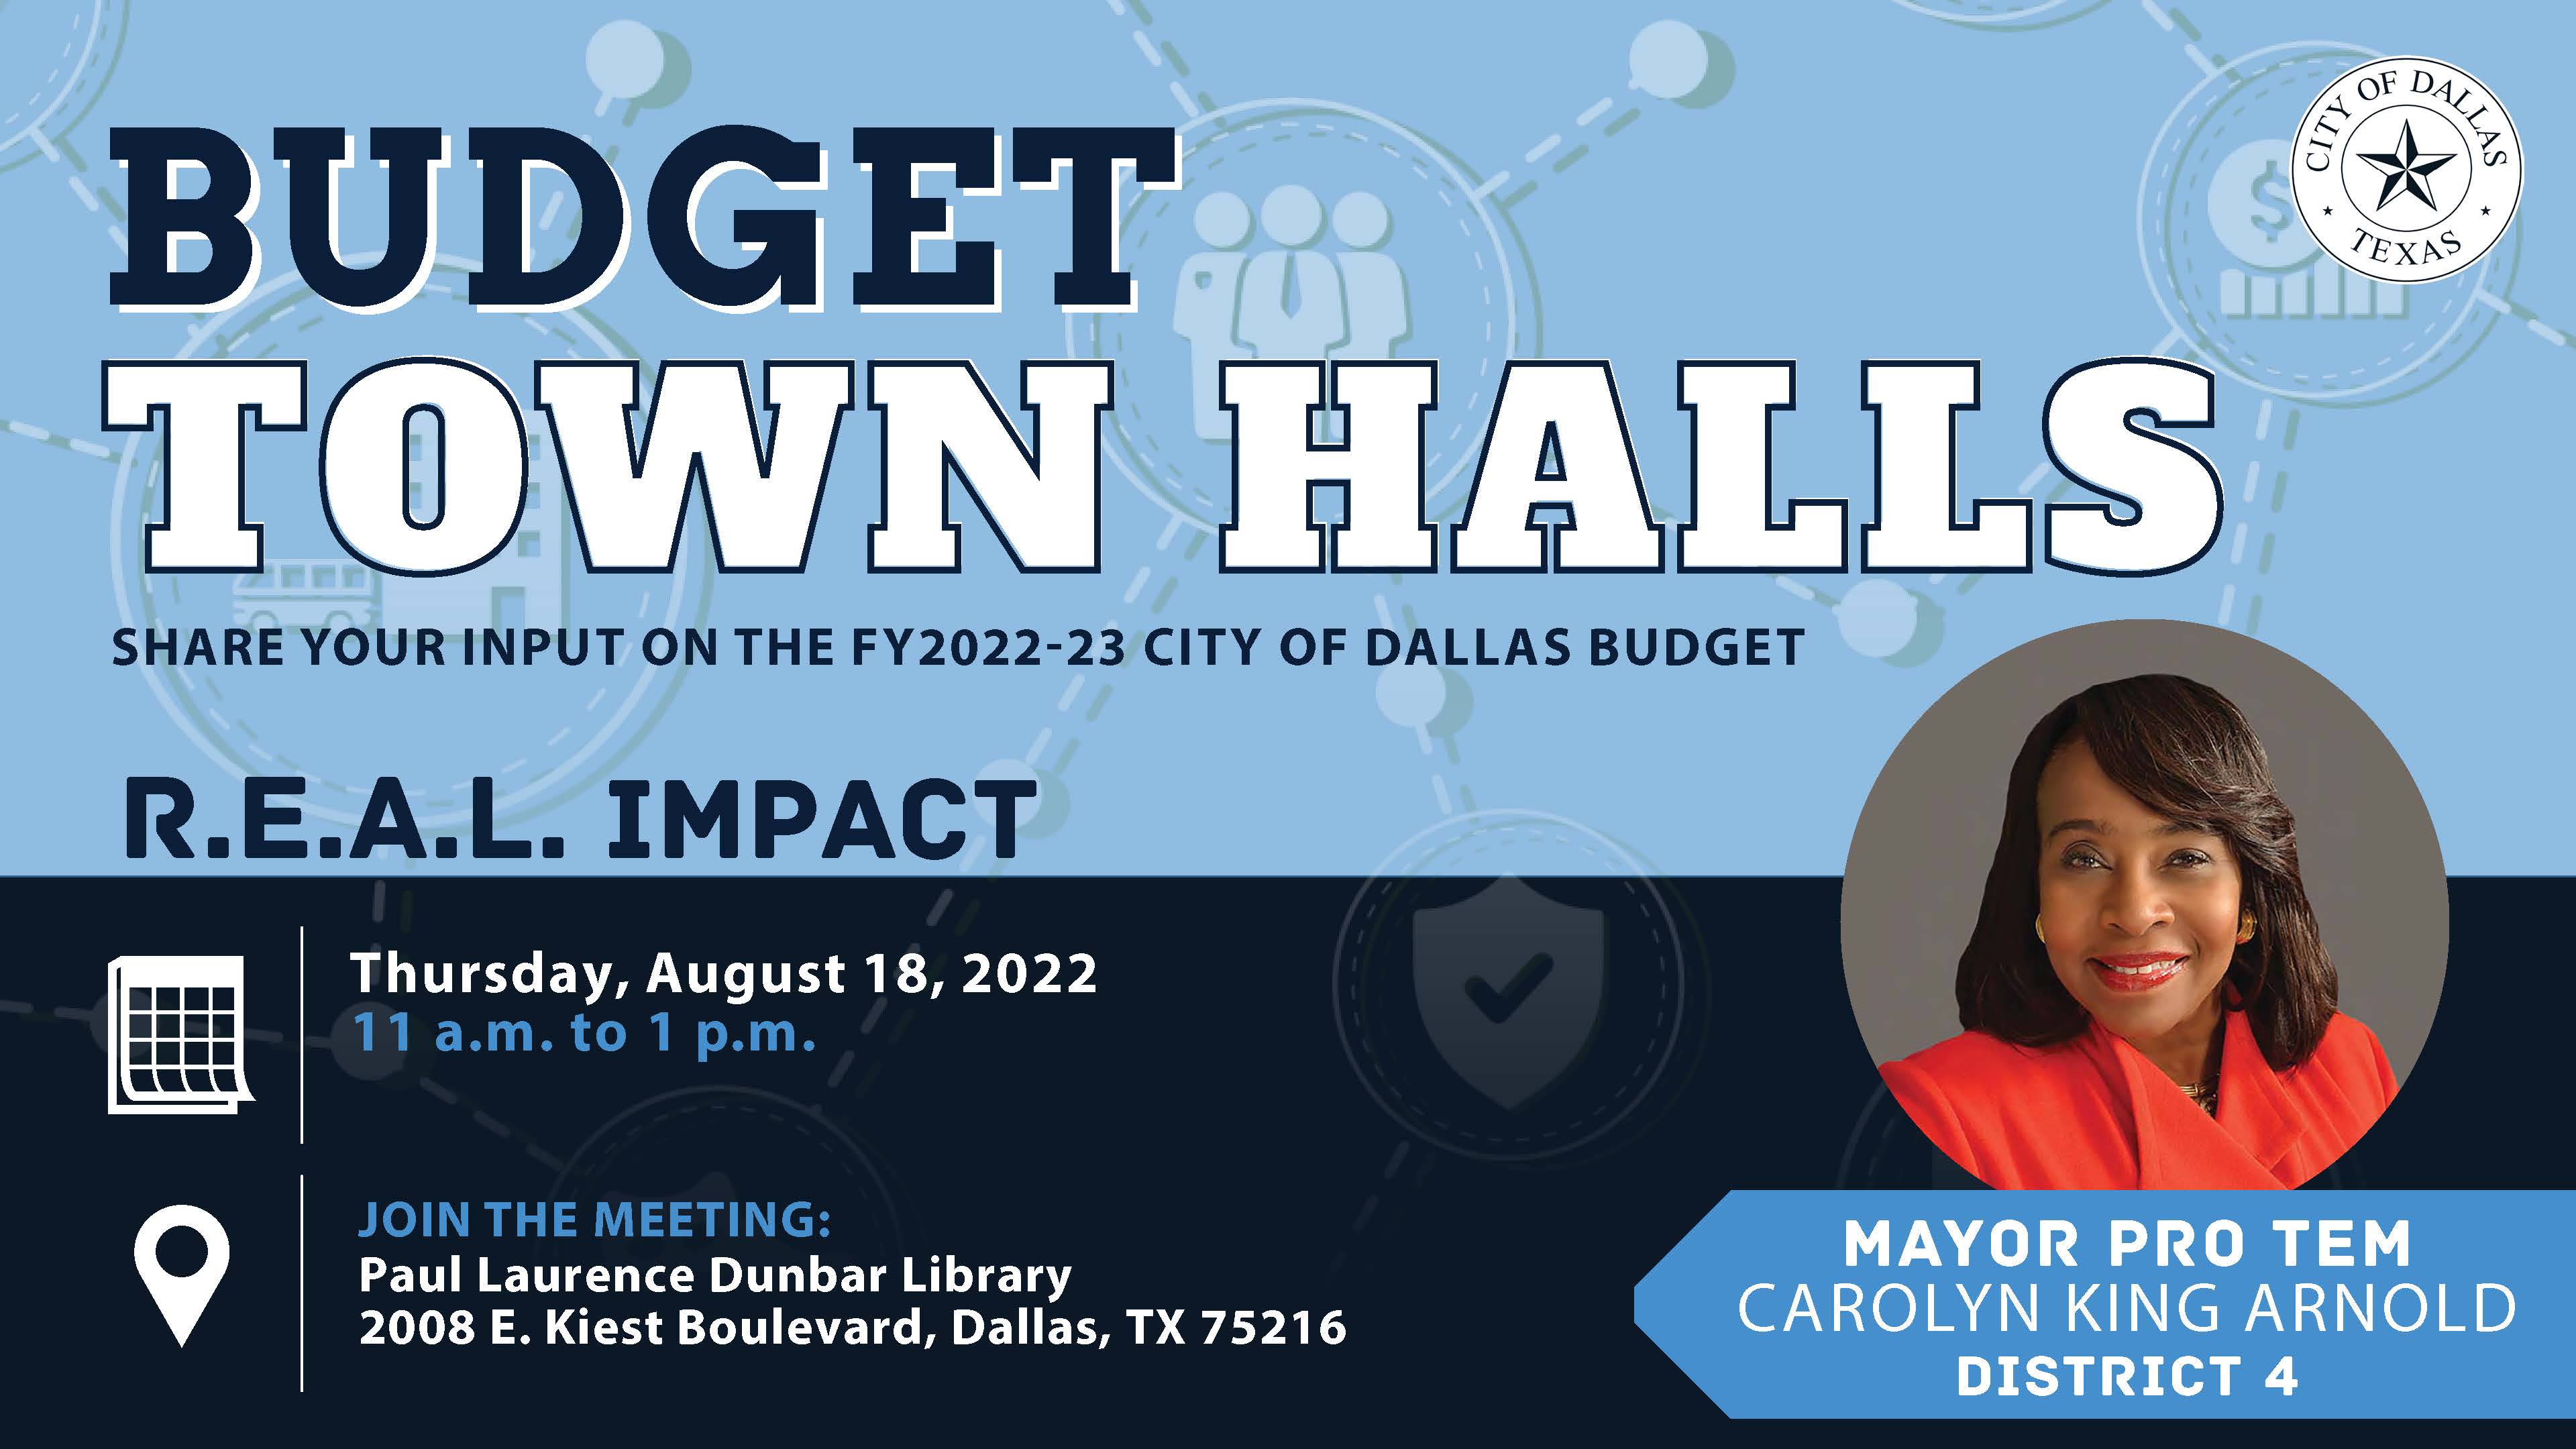 Budget Town Hall Meeting Flyer, District 4, 8.18.22.jpg